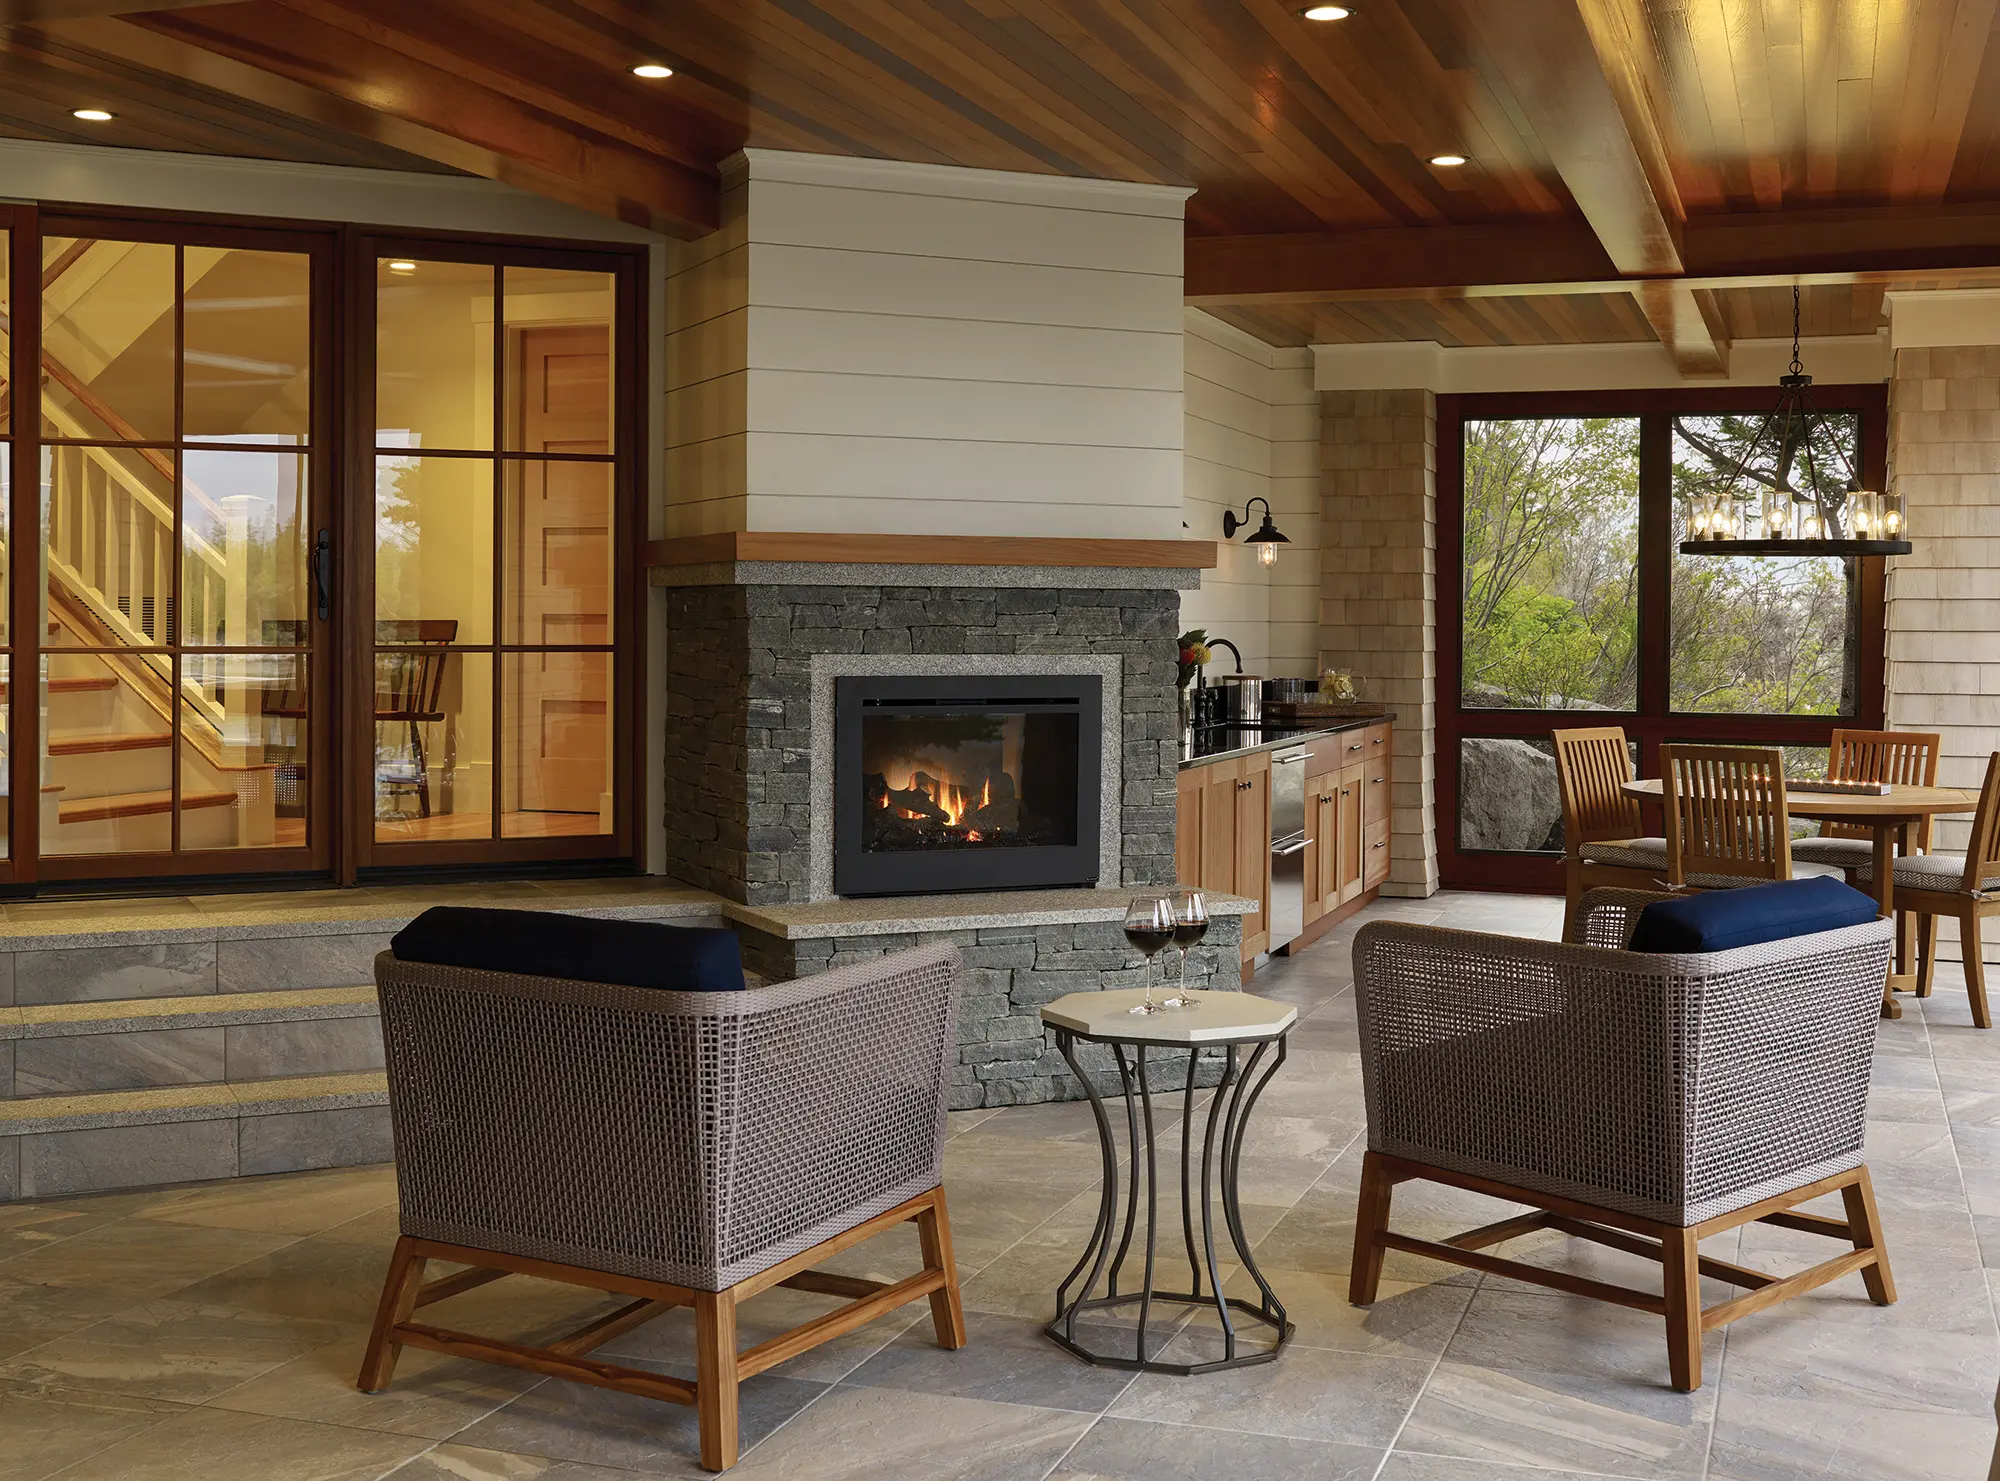 Outdoor fireplace and bar area